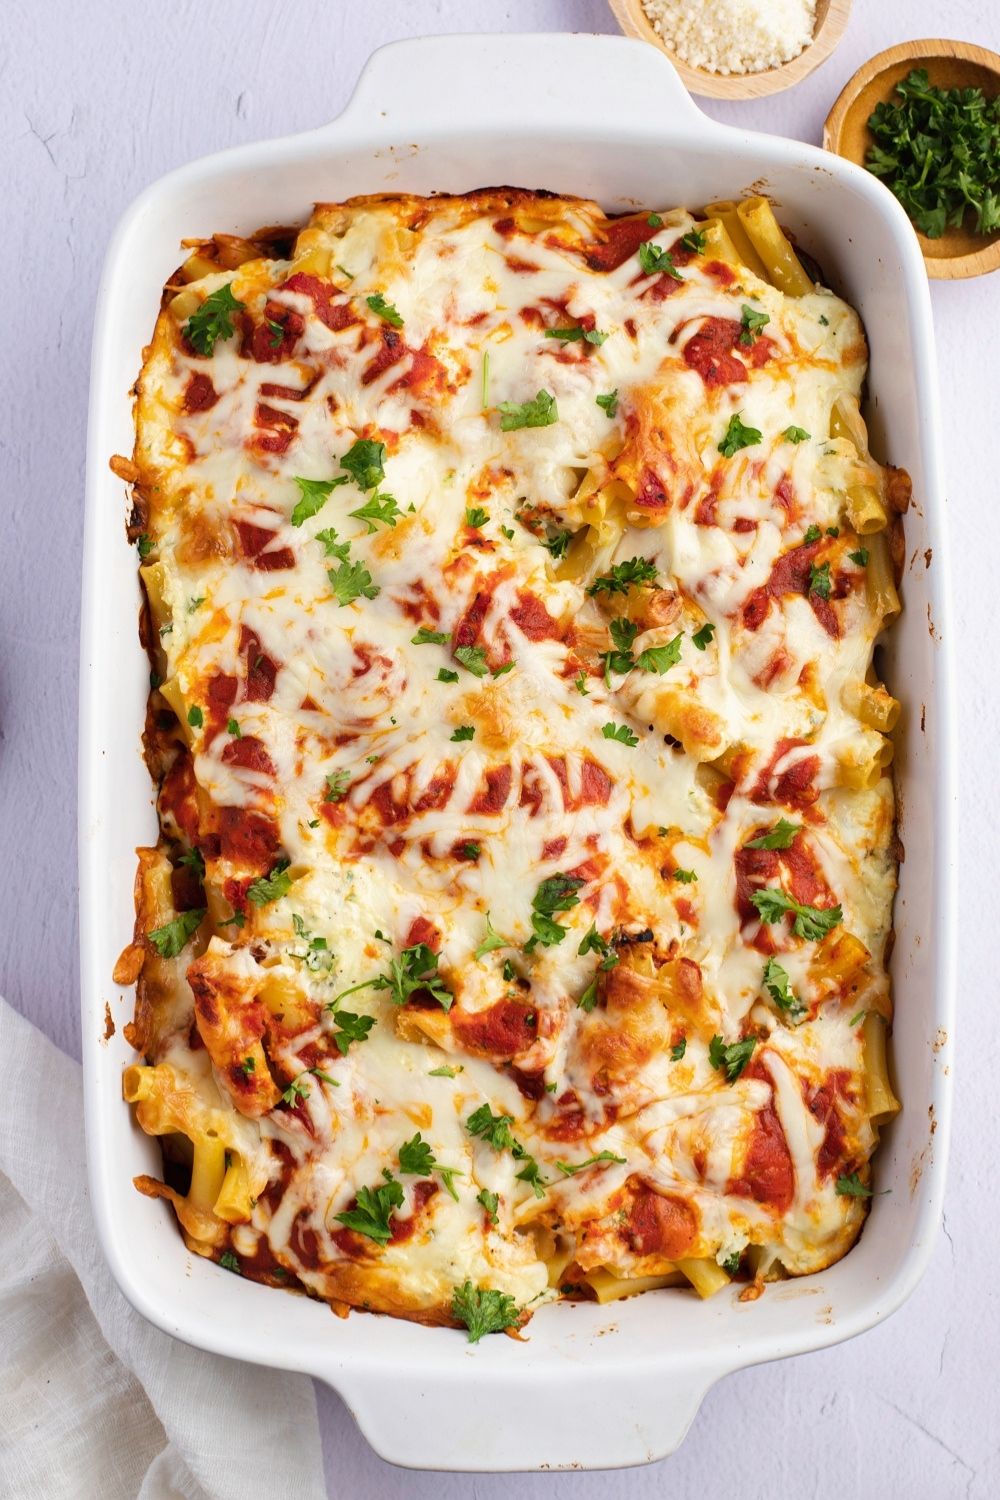 Scrumptious Meatless Baked Ziti in a Baking Dish